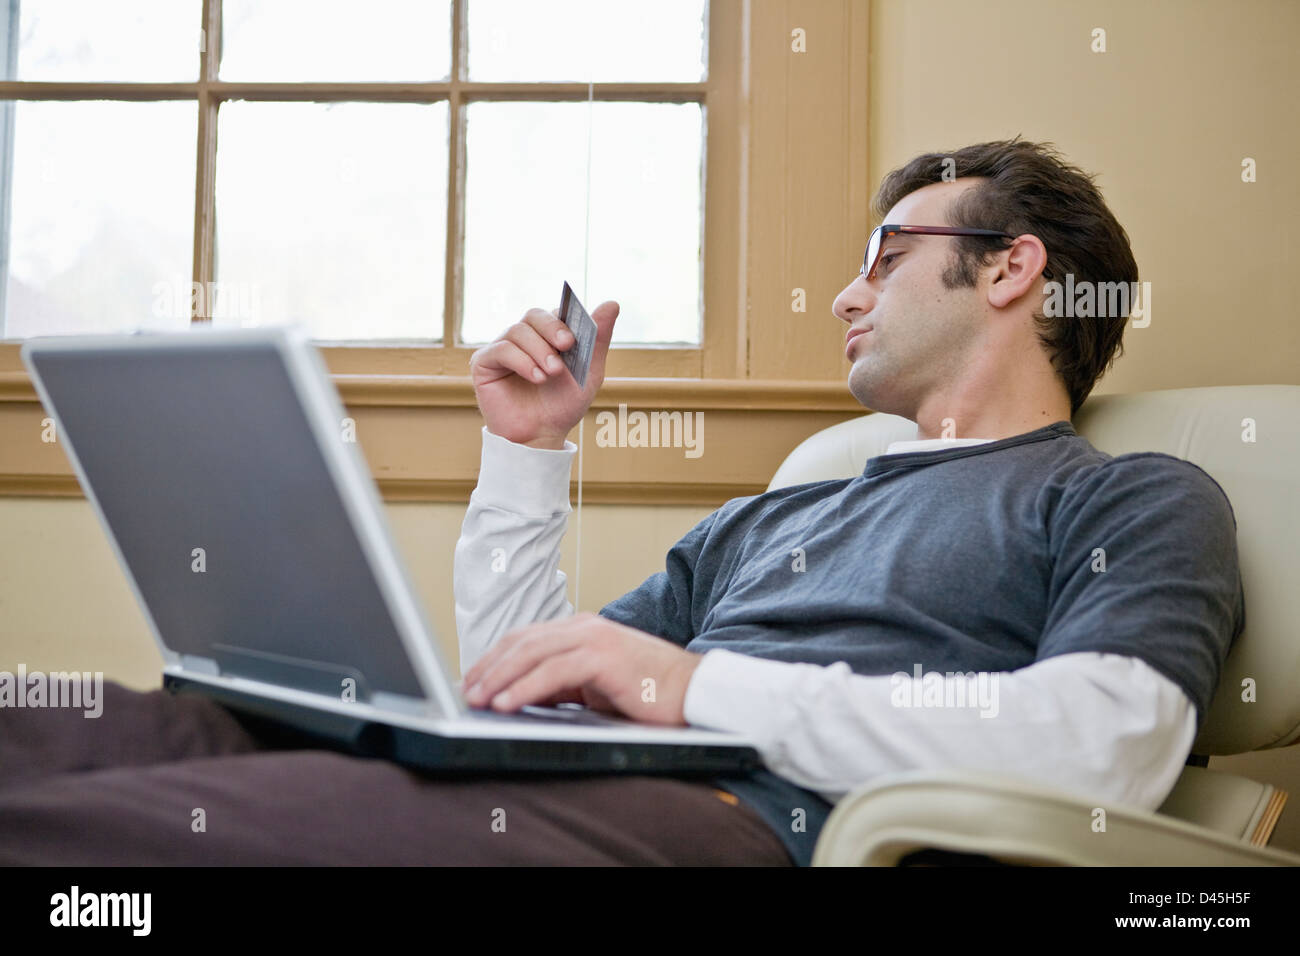 Relaxed Man With Glasses Shopping Online Using Credit Card Stock Photo